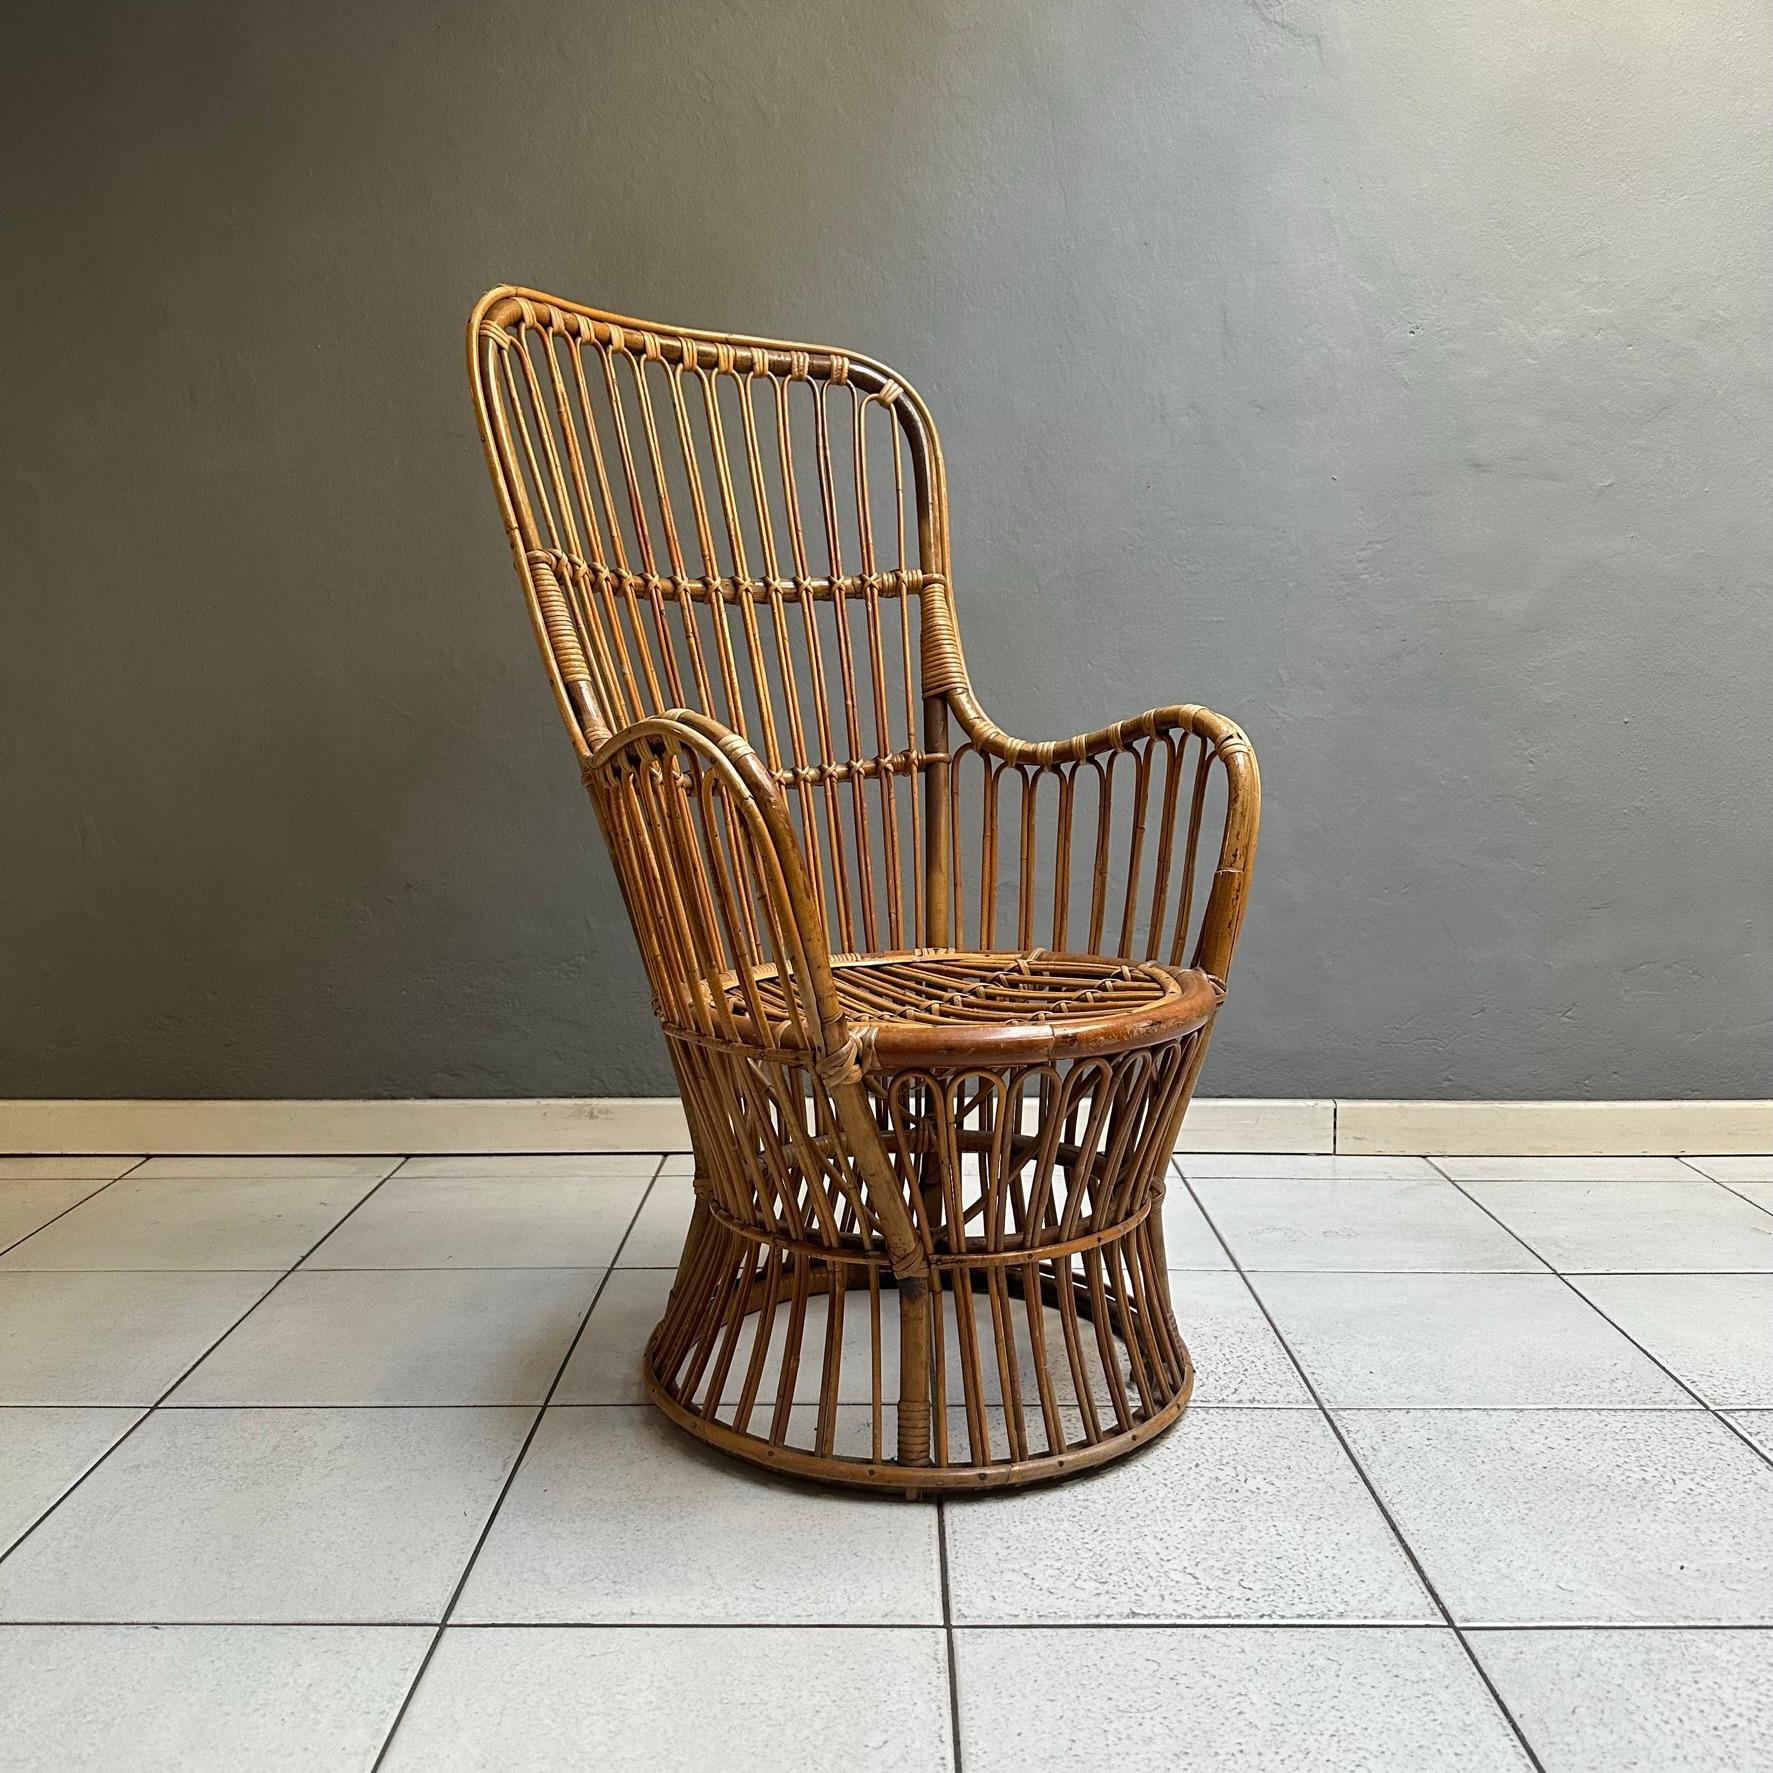 Wicker armchair from the fifties, Italian manufacture.
The wicker armchair has an important and elegant appearance thanks to the weaving of the wood. 
The seat with balconies is enveloping
